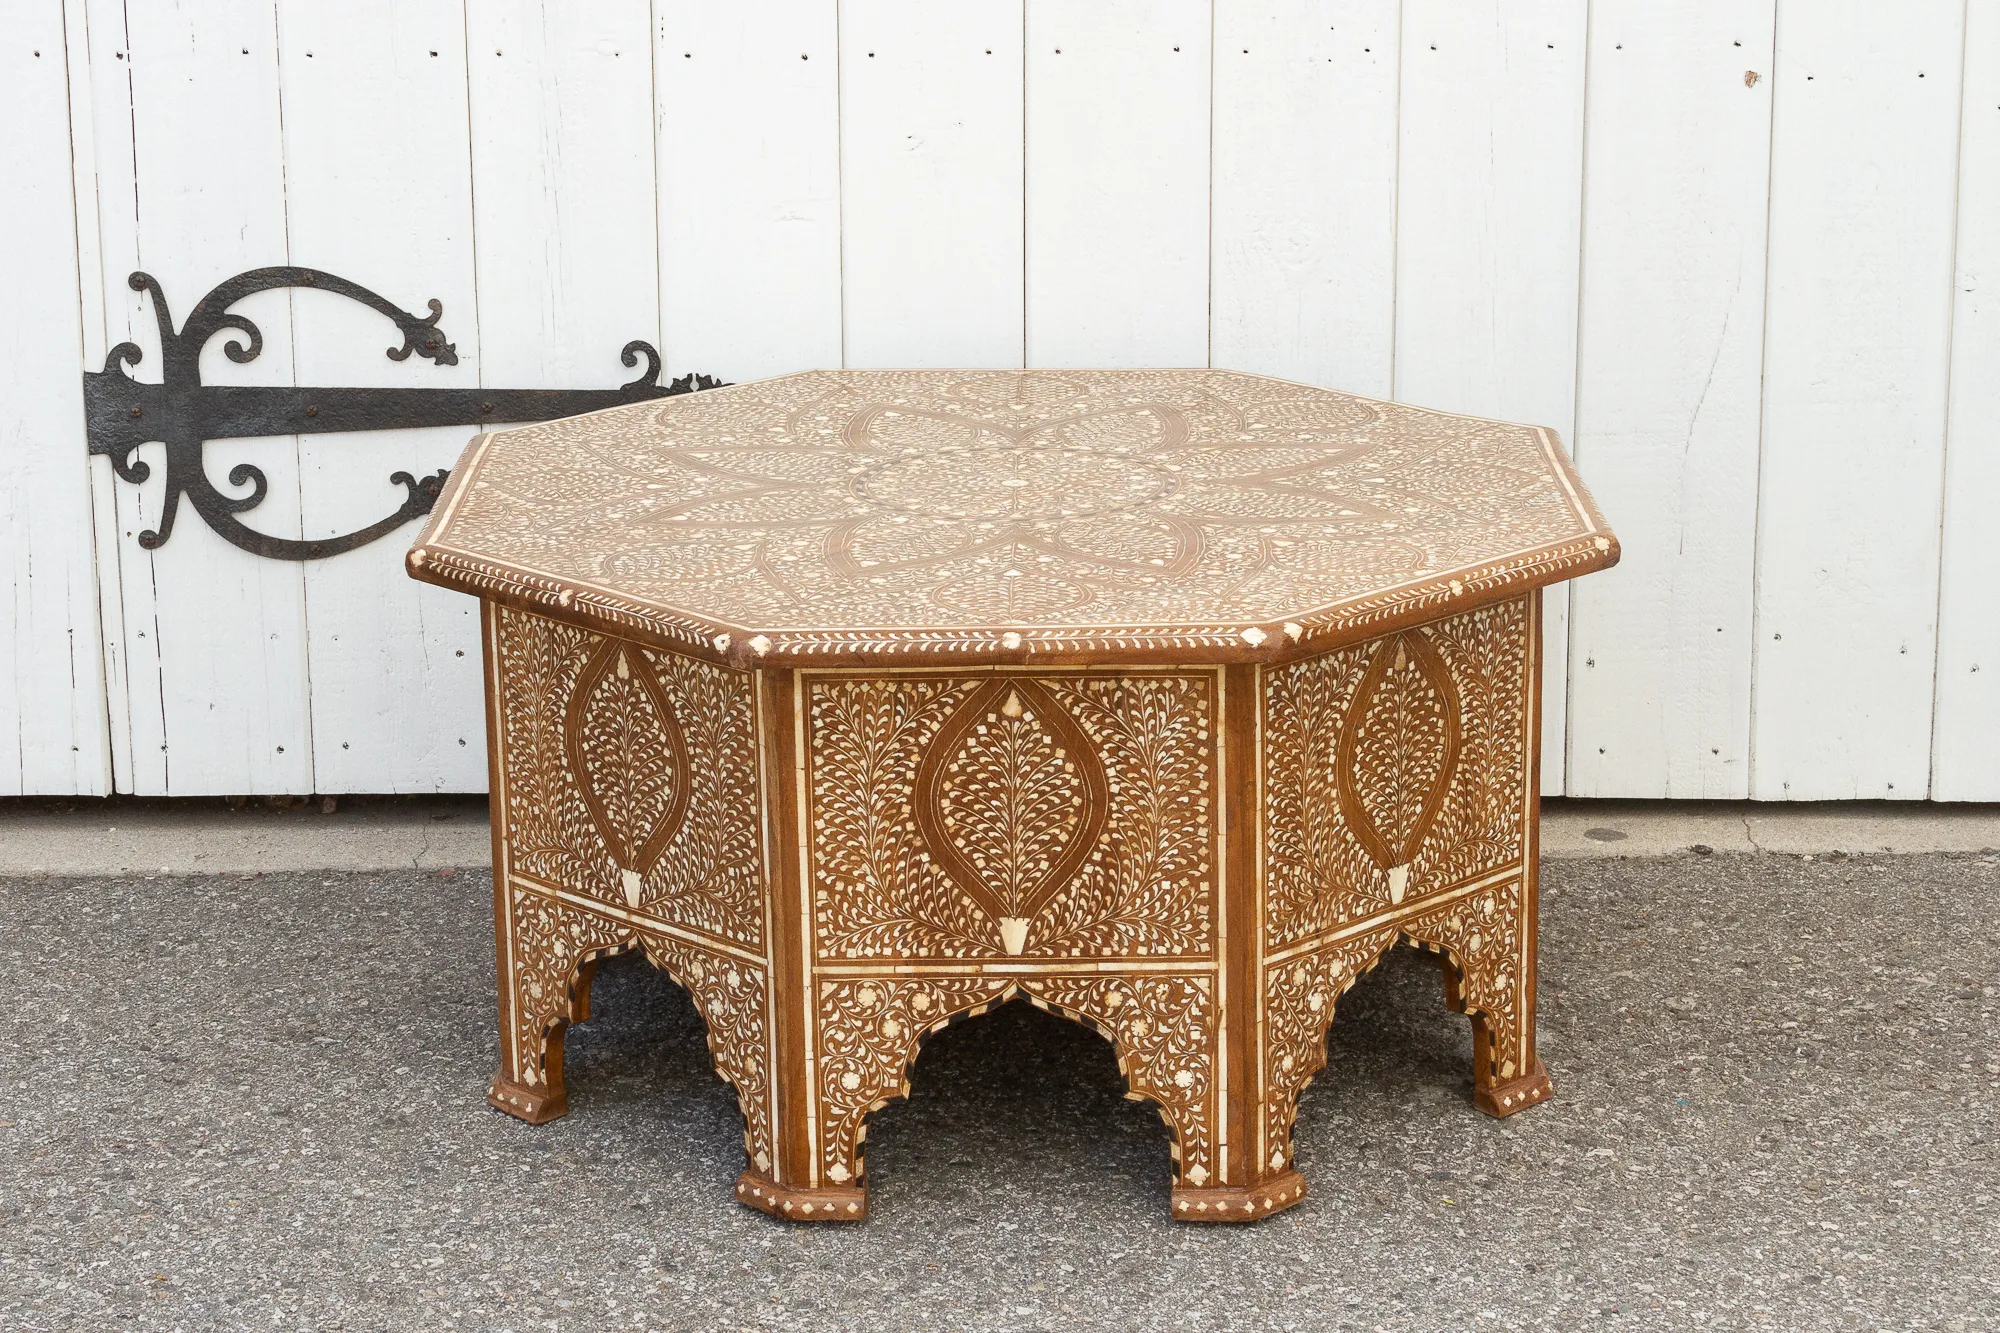 Octagonal Indian Inlaid Coffee Table - de-cor - Handcrafted - Brown